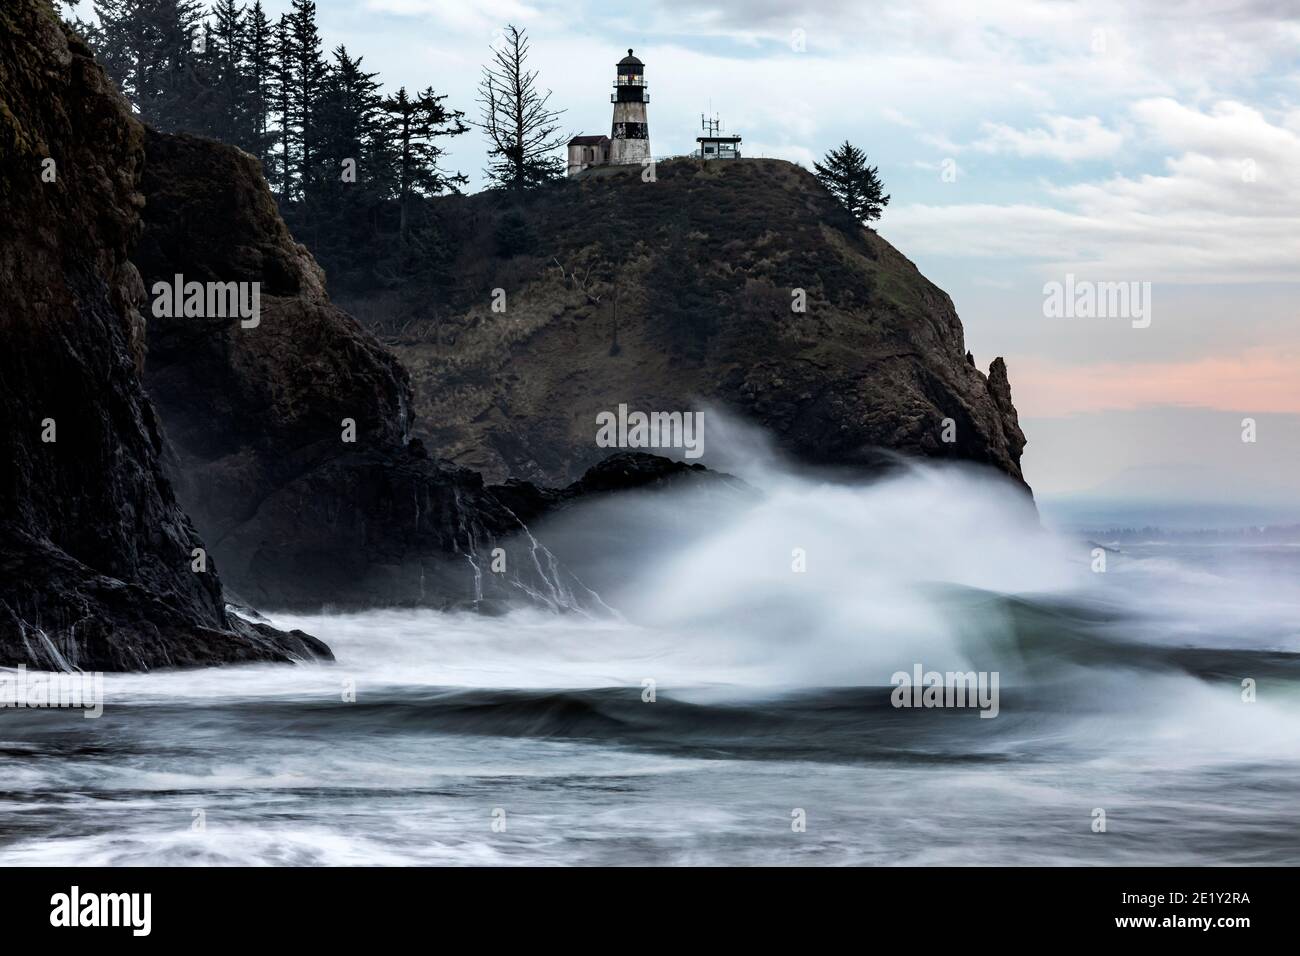 WA20035-00.....WASHIHGTON - Crashing surf at Cape Disappointment Lighthouse near the outflow of the Columbia River in Cape Disappointment State Park. Stock Photo